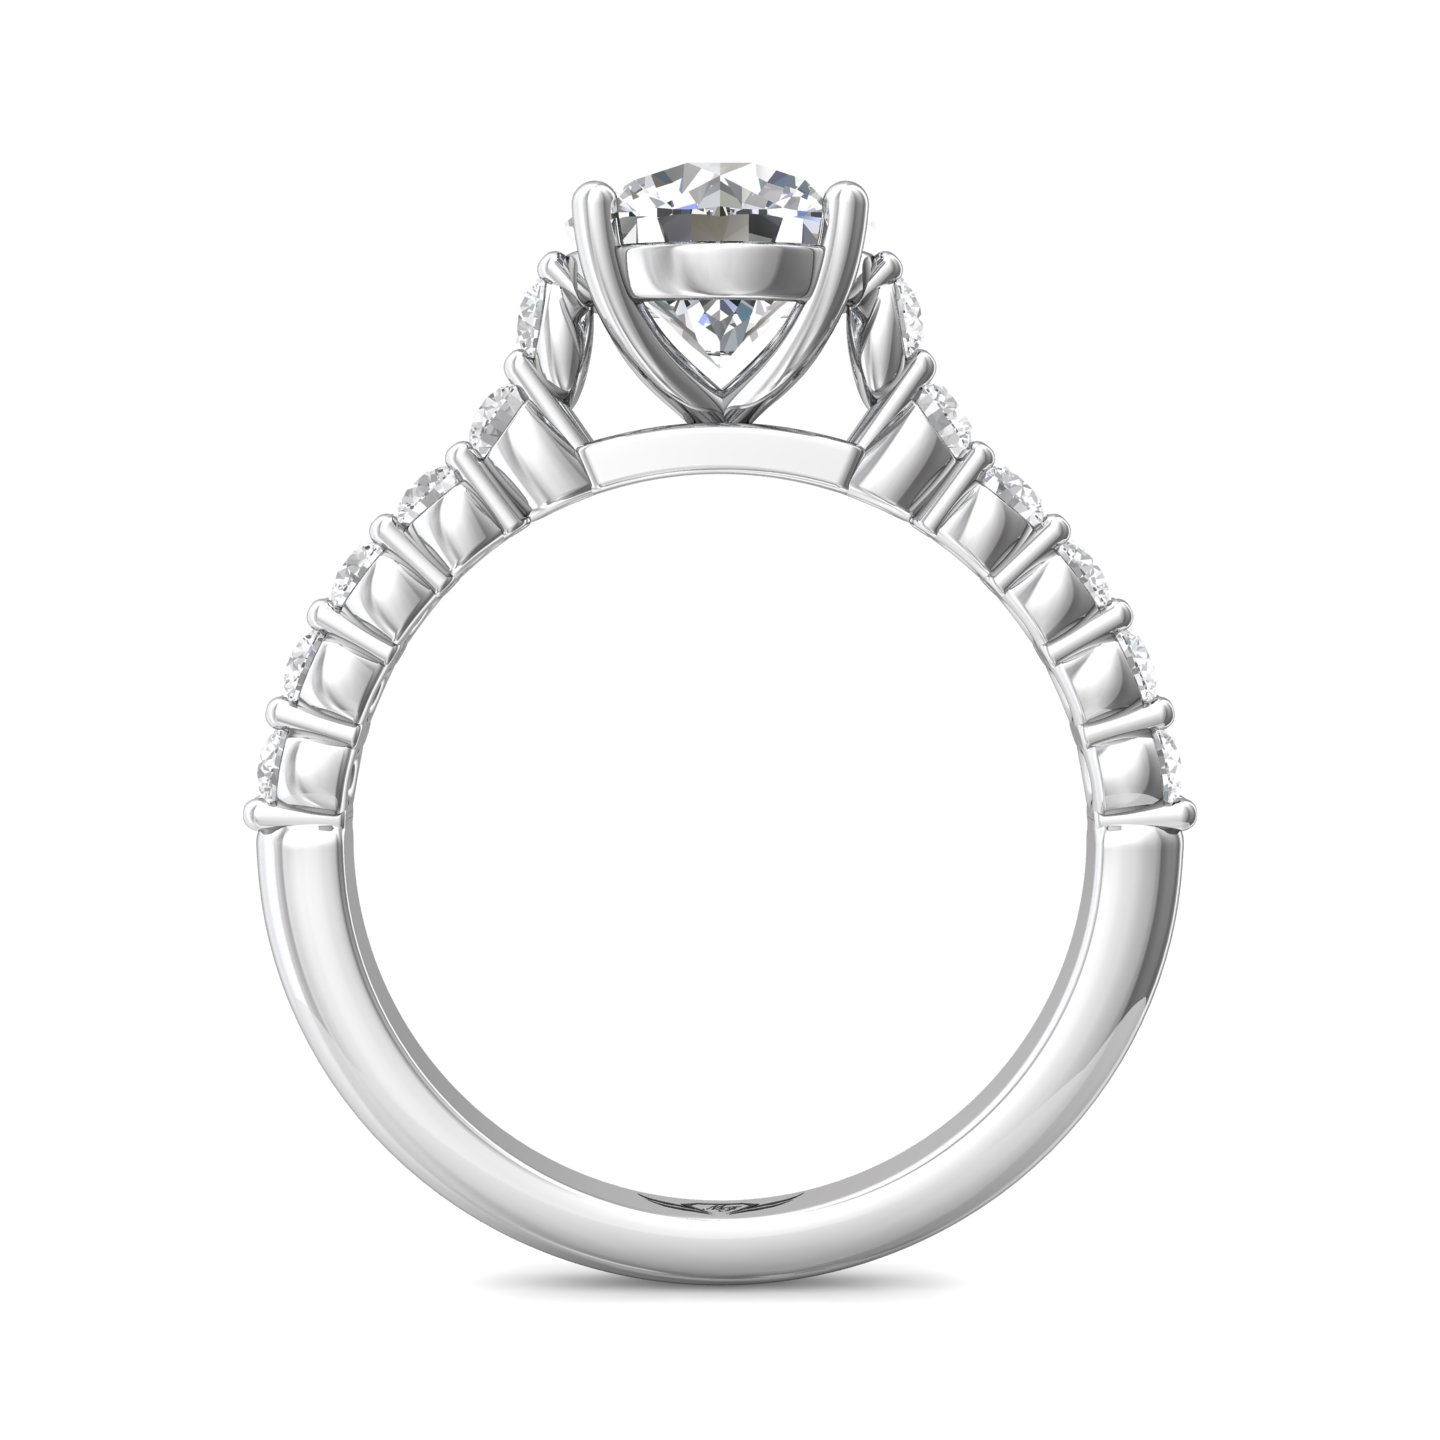 14K White Gold FlyerFit Channel/Shared Prong Engagement Ring Image 2 Christopher's Fine Jewelry Pawleys Island, SC